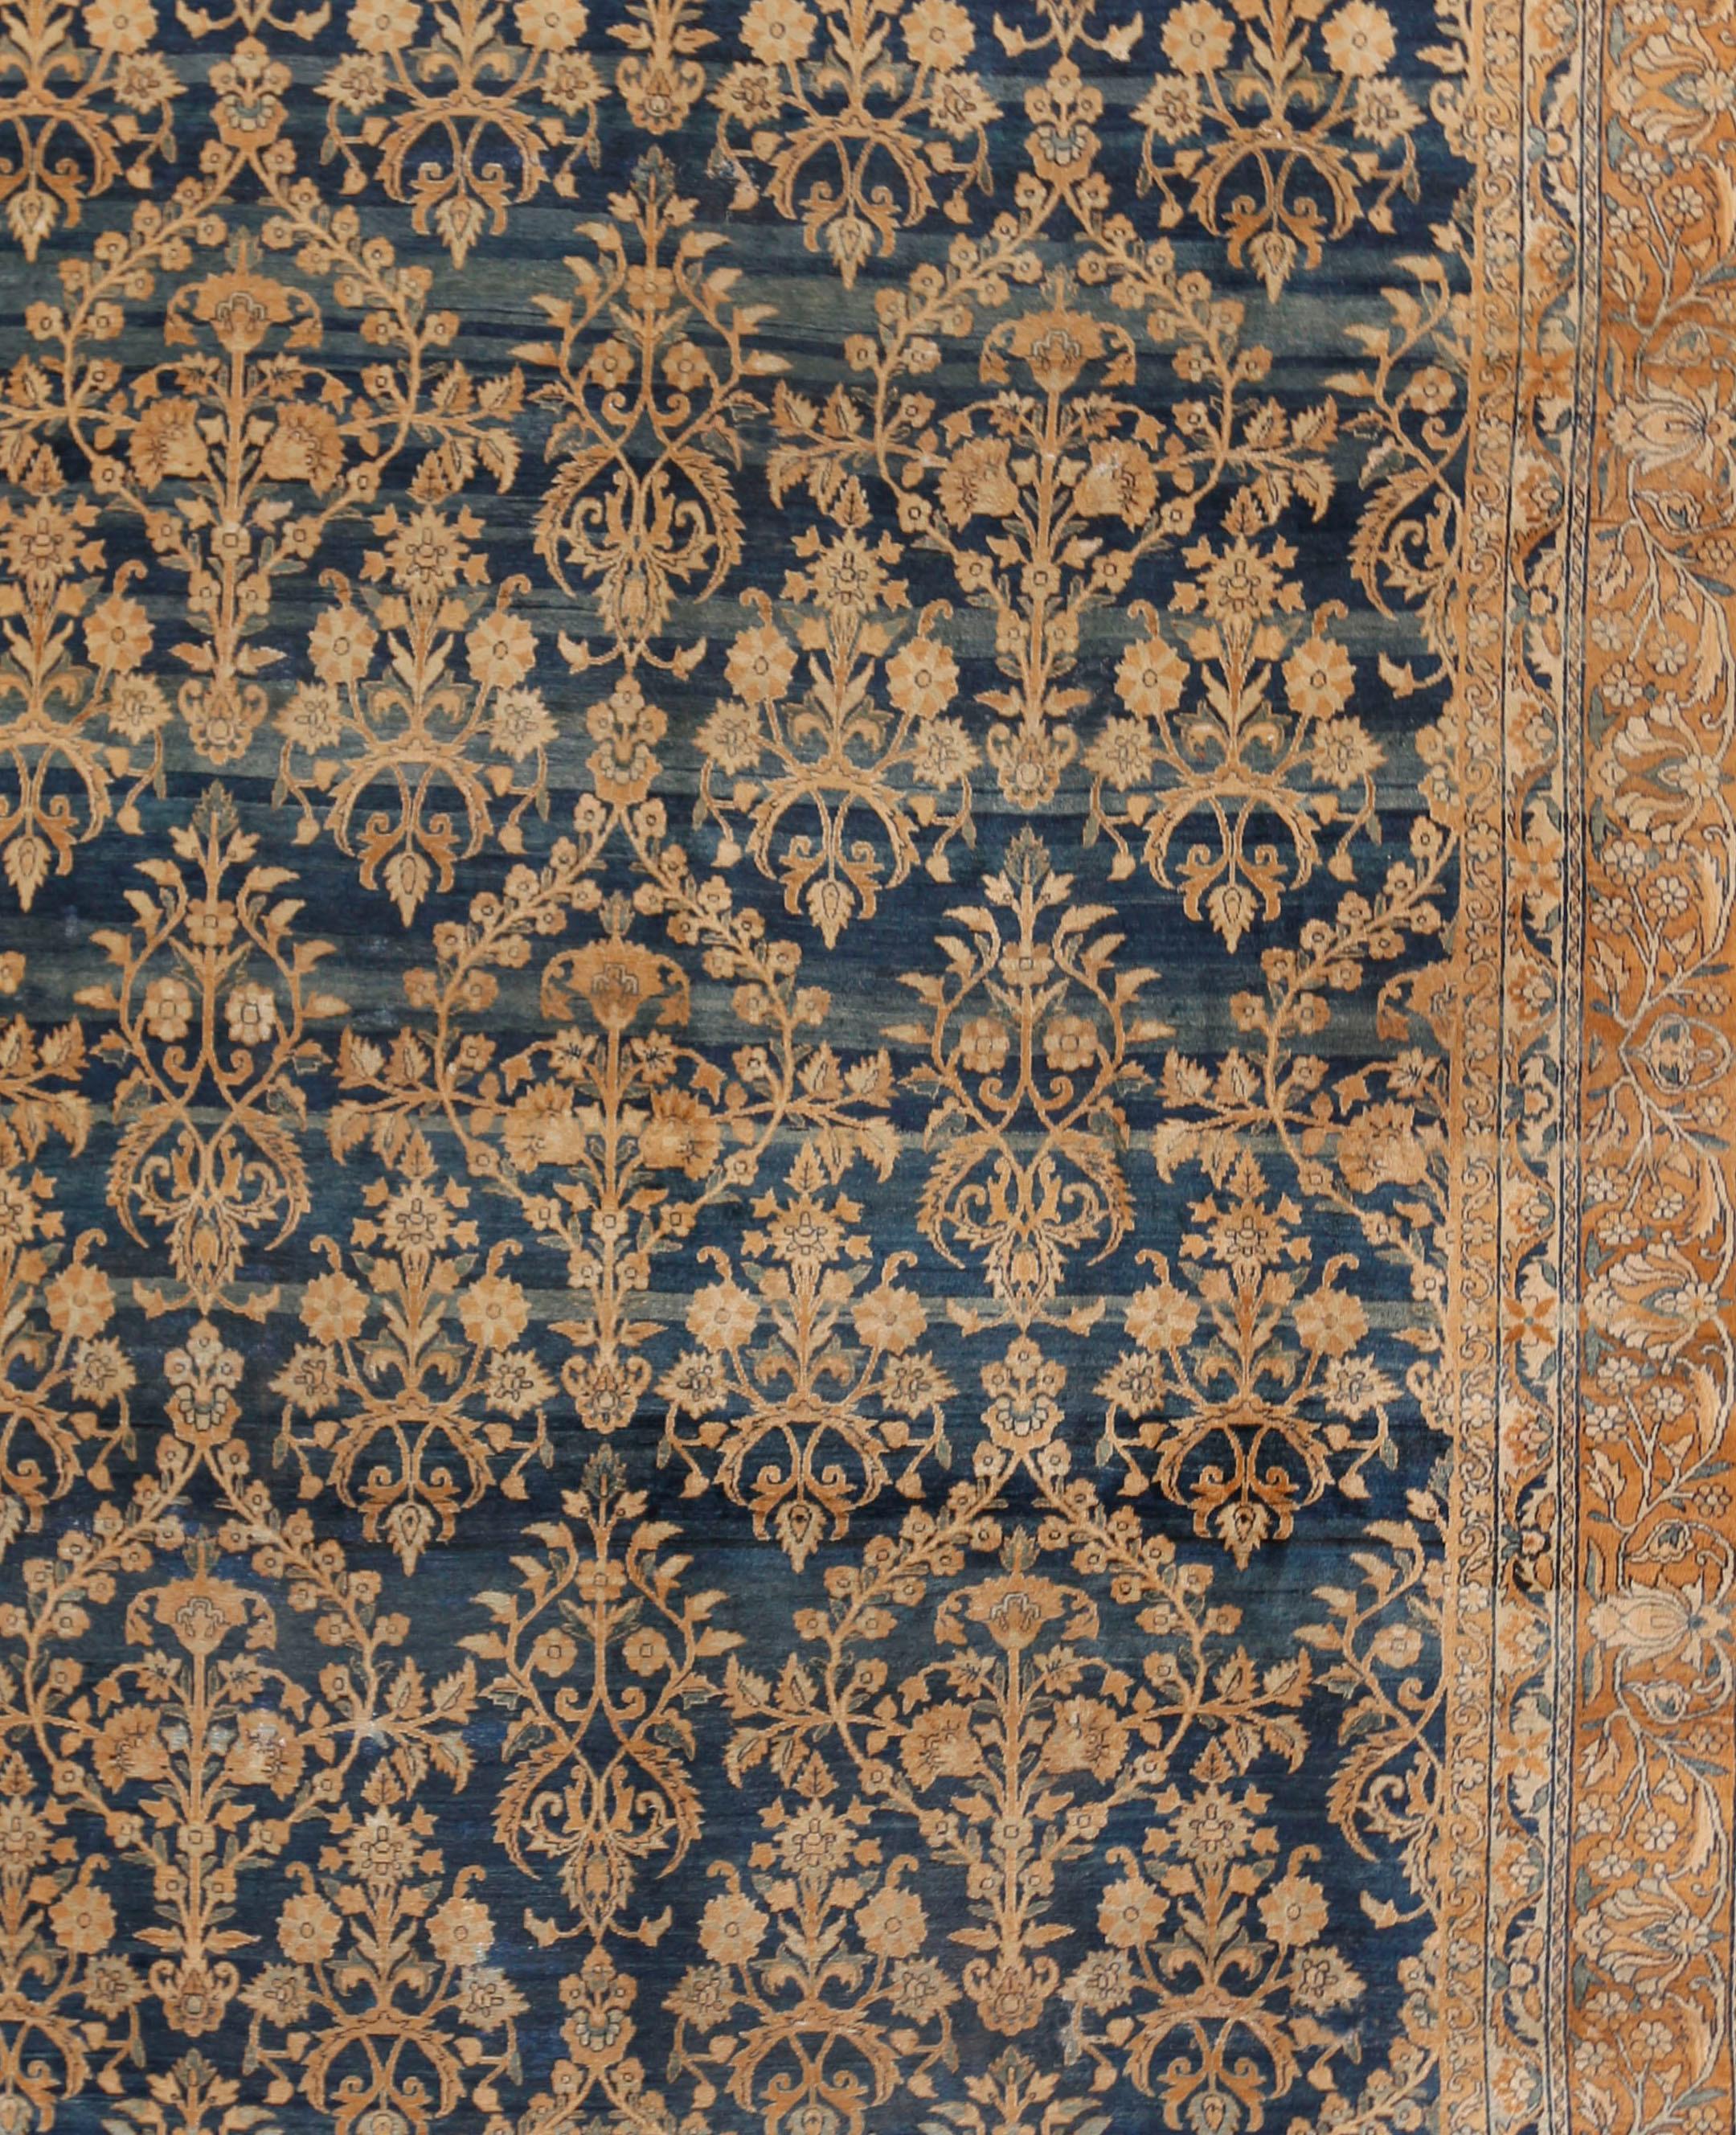 Antique Persian Kirman rug, circa 1900, 9'4 x 12'10. A wonderful antique circa 1900 Kirman rug in tones of blue with an abrash in the blues. An abrash is a natural change in color that occurs when different dyes are used and is very common in